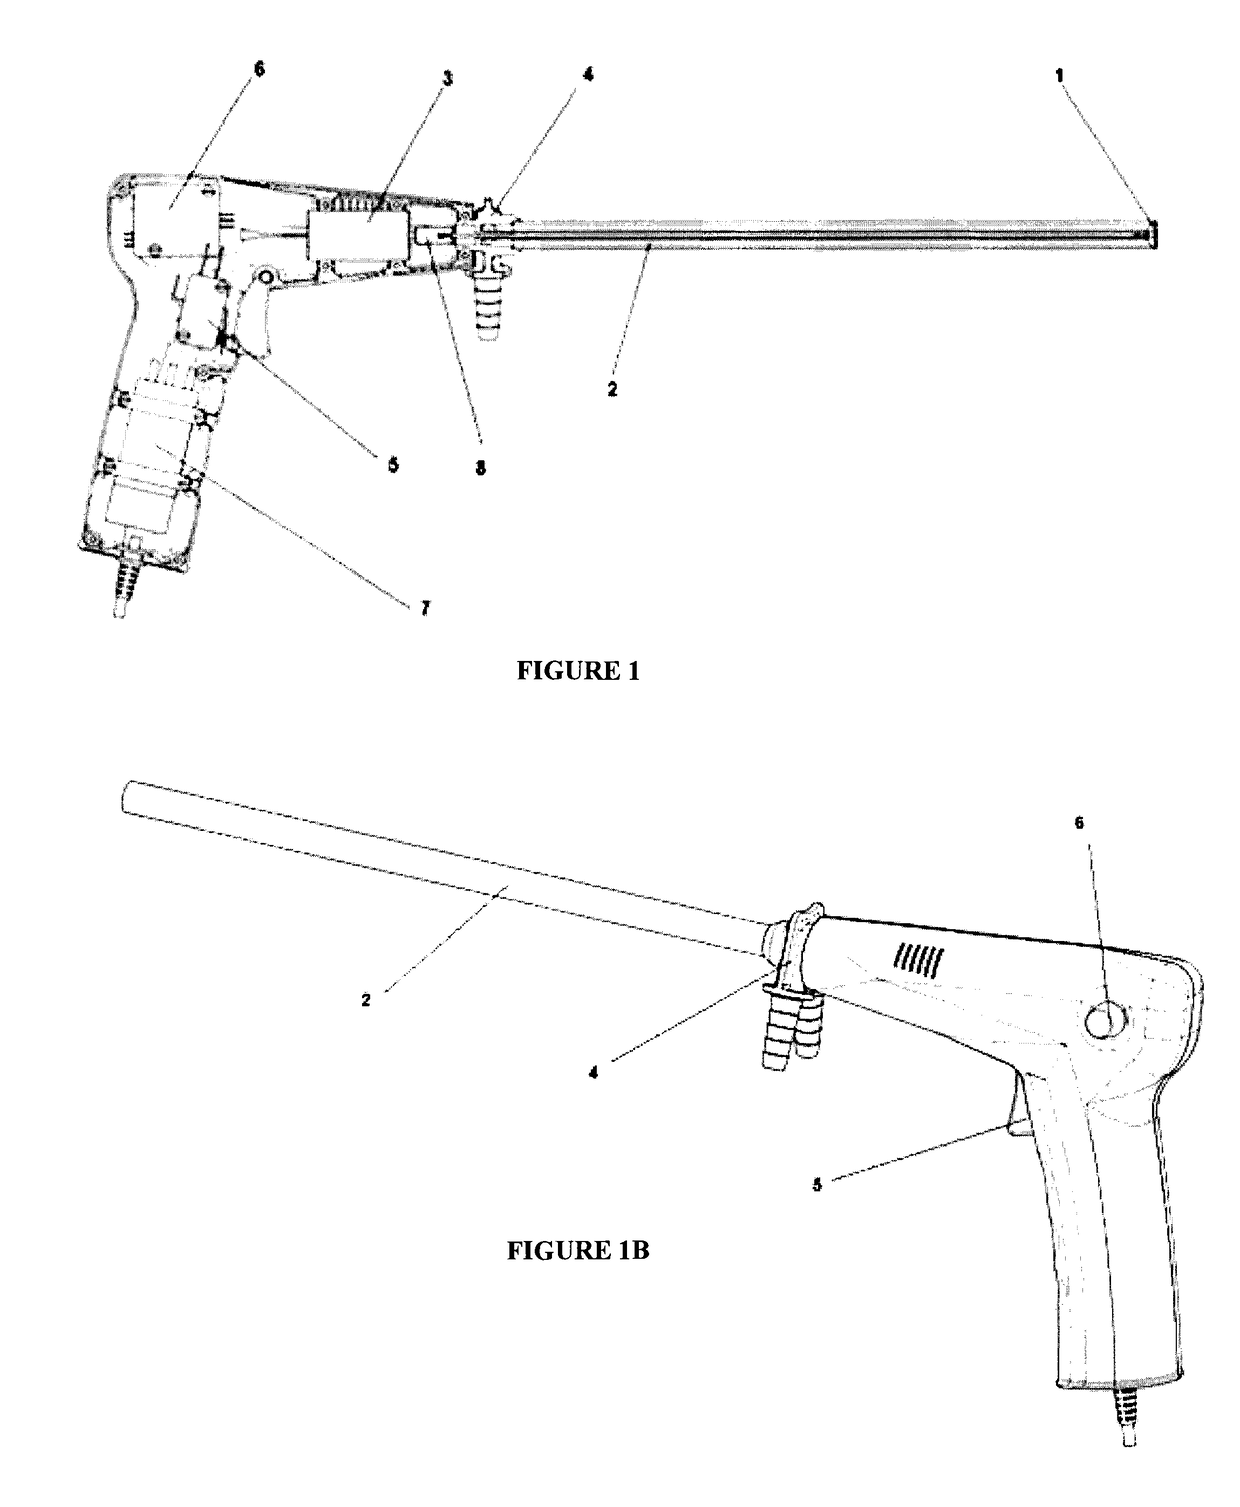 A device used in the implementation of laparoscopic hydatid cyst operations